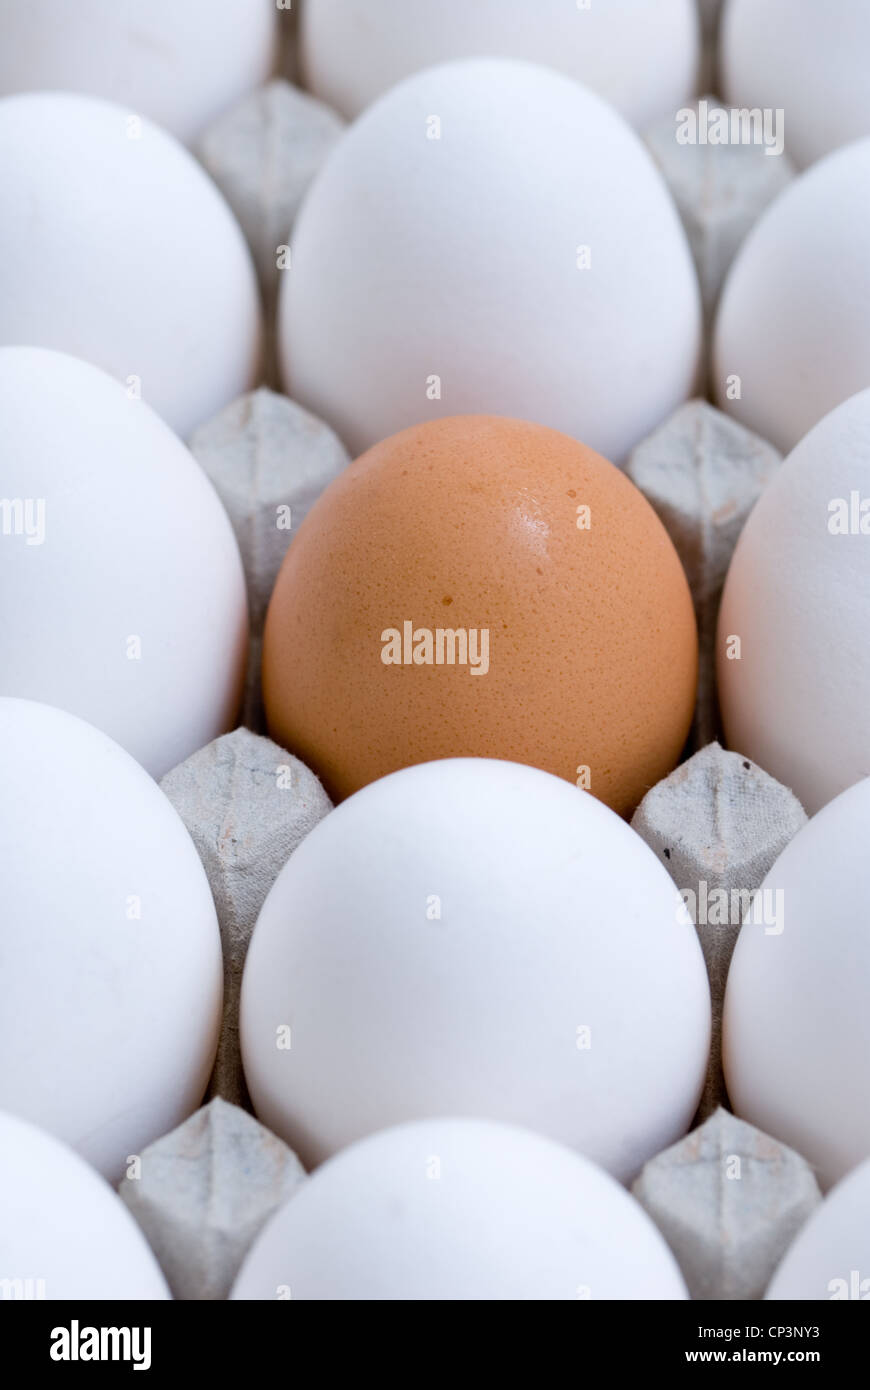 Close up of white eggs and a brown chicken egg, this images raises an abstract concept of differences. Stock Photo